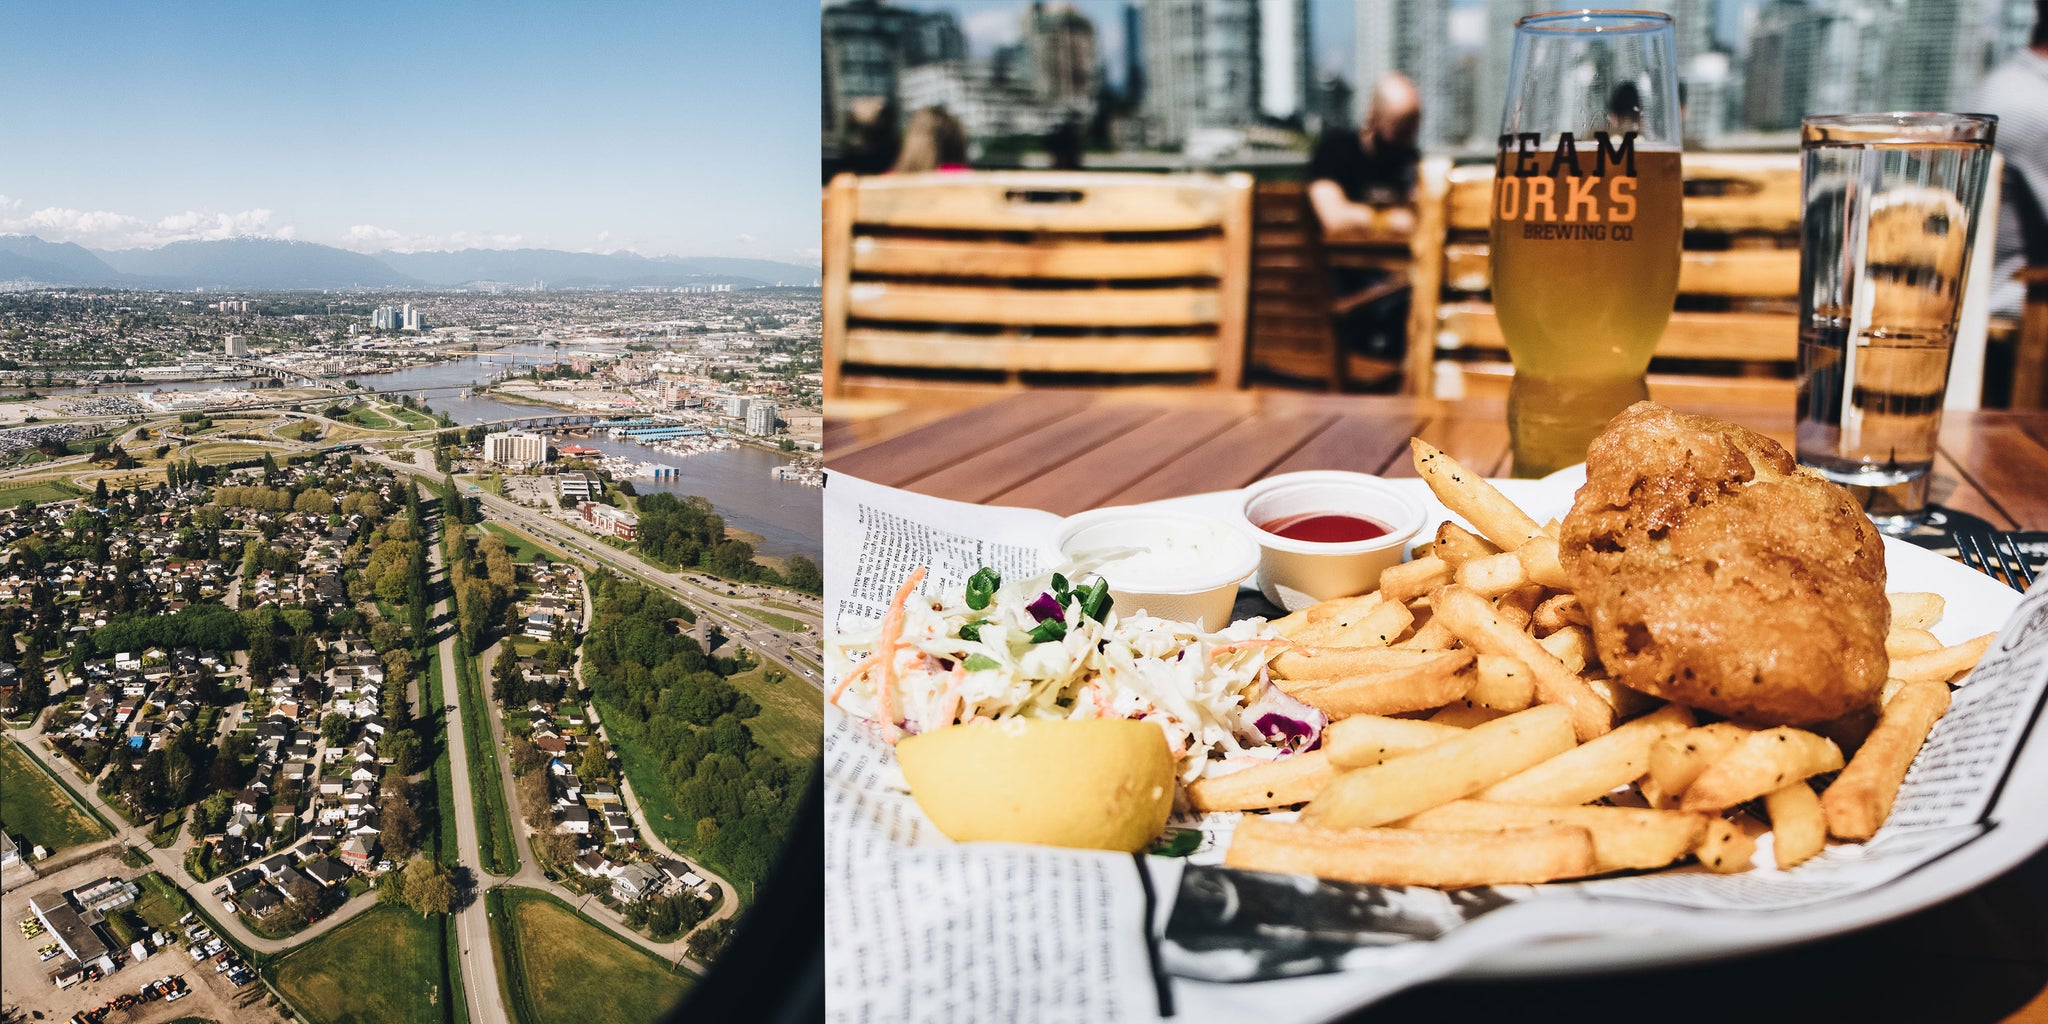 Bather's Excellent Adventures in Vancouver with Brandon Lind | Lunch at Team Works Brewing Co.